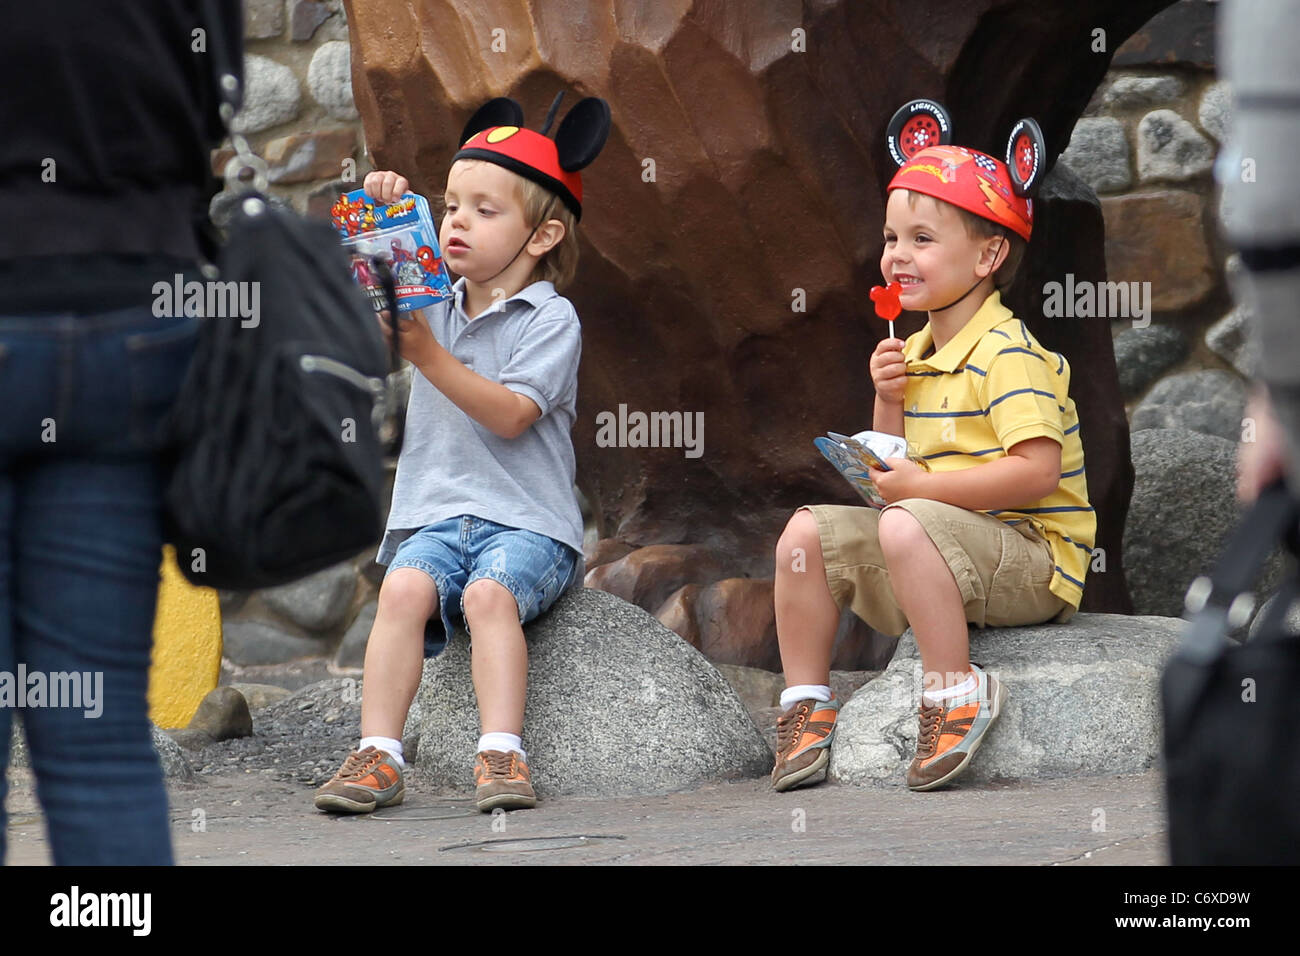 Britney spears's children Jayden james and Sean Preston spend the mothers day weekend together at Disney Land. The kids are Stock Photo